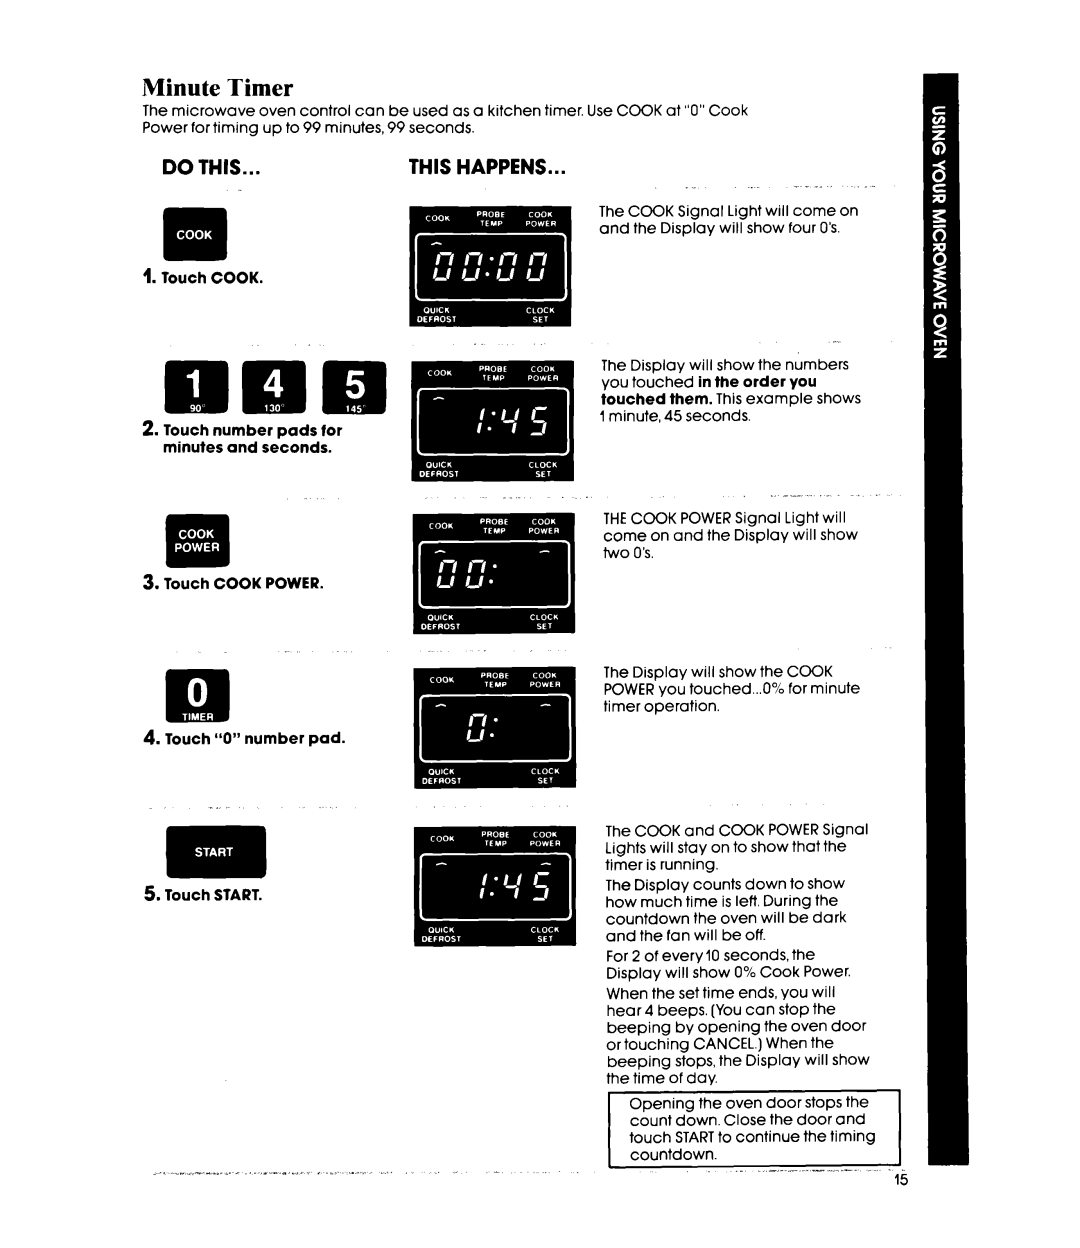 Whirlpool MW8520XP manual Minute Timer, Do This, This Happens 